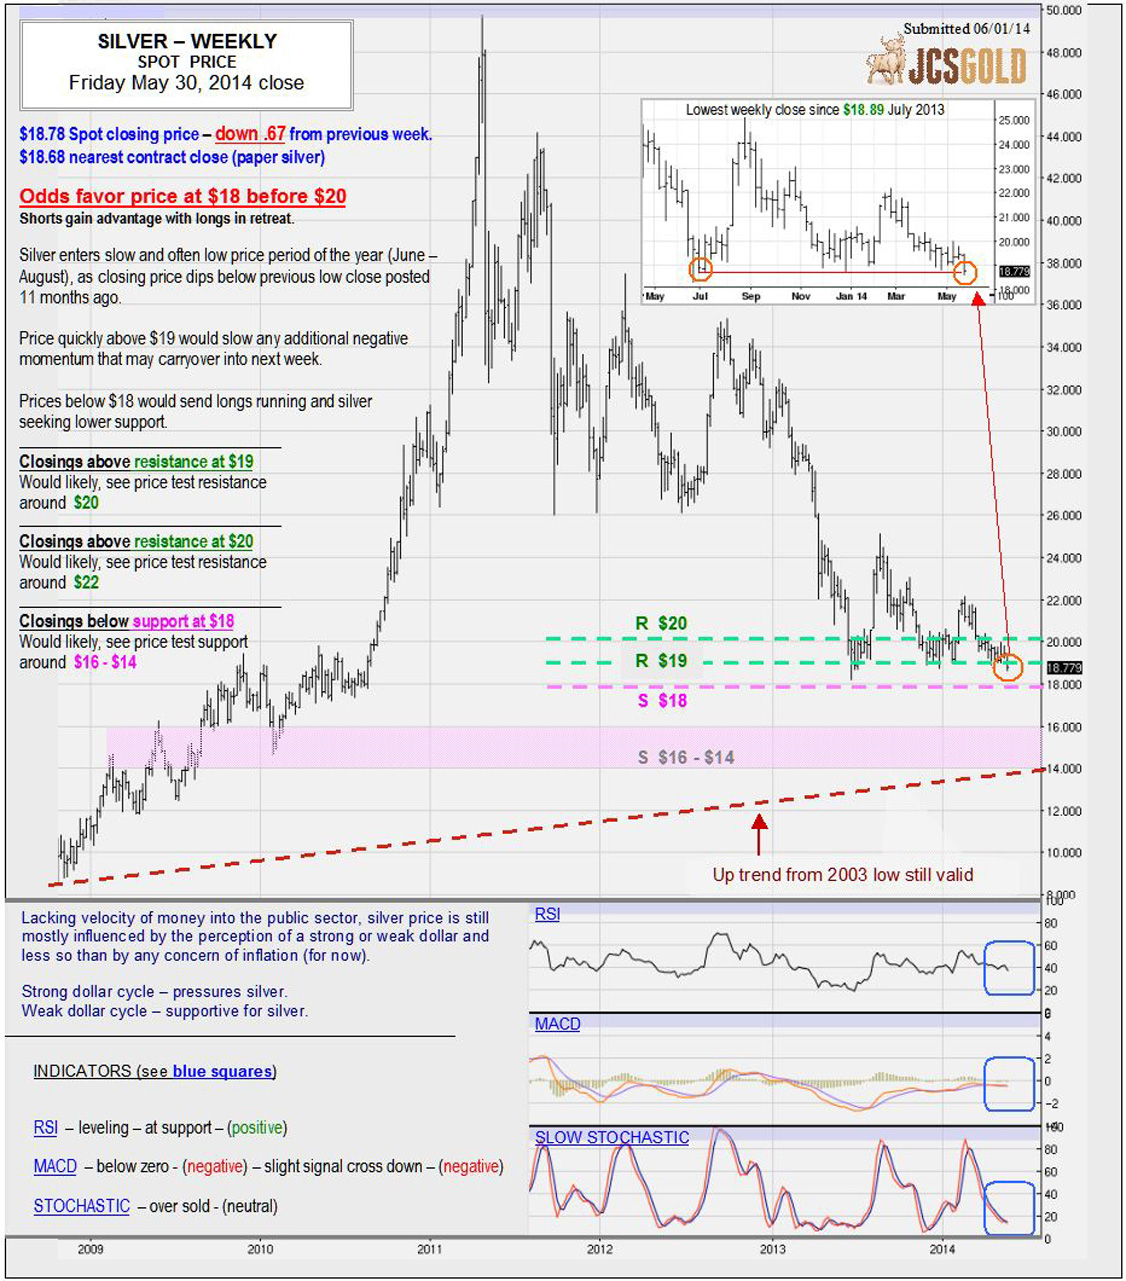 May 30, 2014 chart & commentary